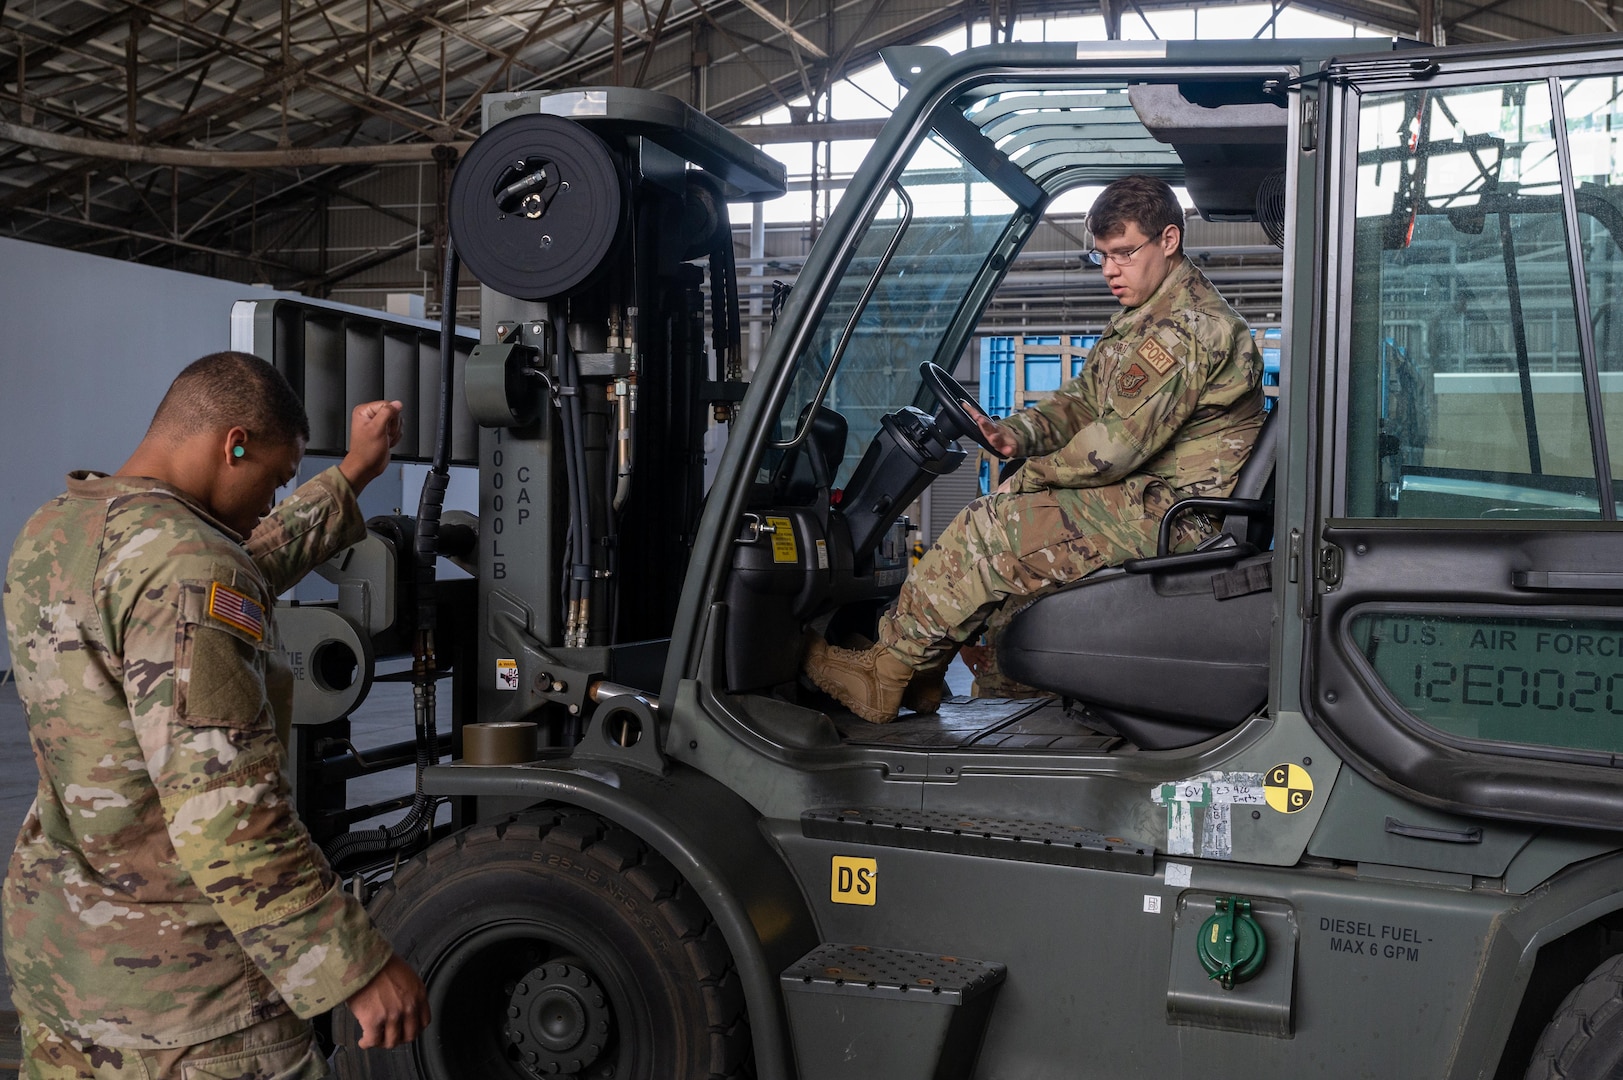 A service member helps guide a forklift onto a scale.